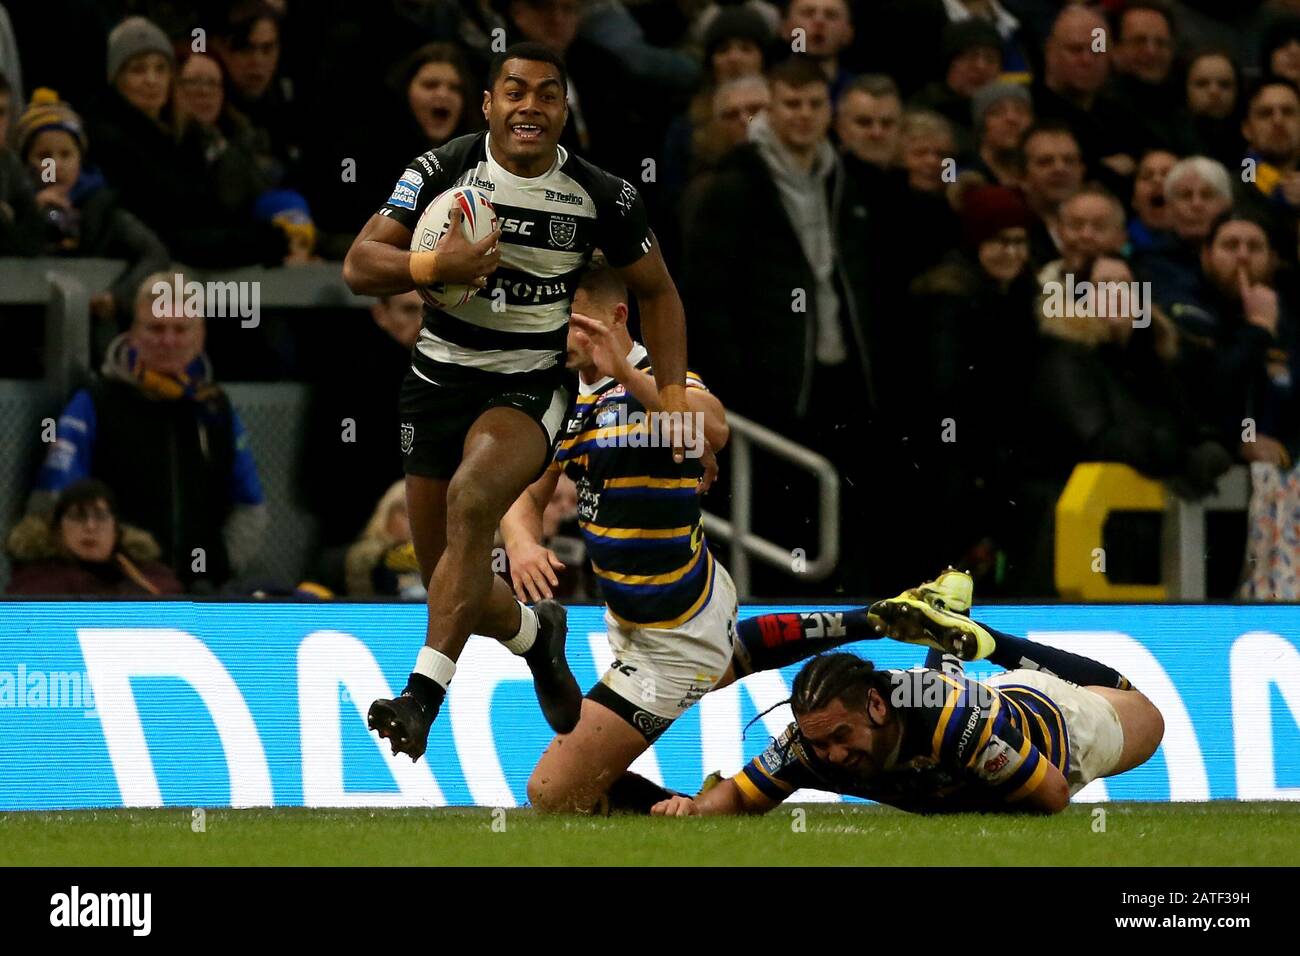 Hull Fc Ratu Naulago in action during the Betfred Super League match at Emerald Headingley Stadium, Leeds. Stock Photo